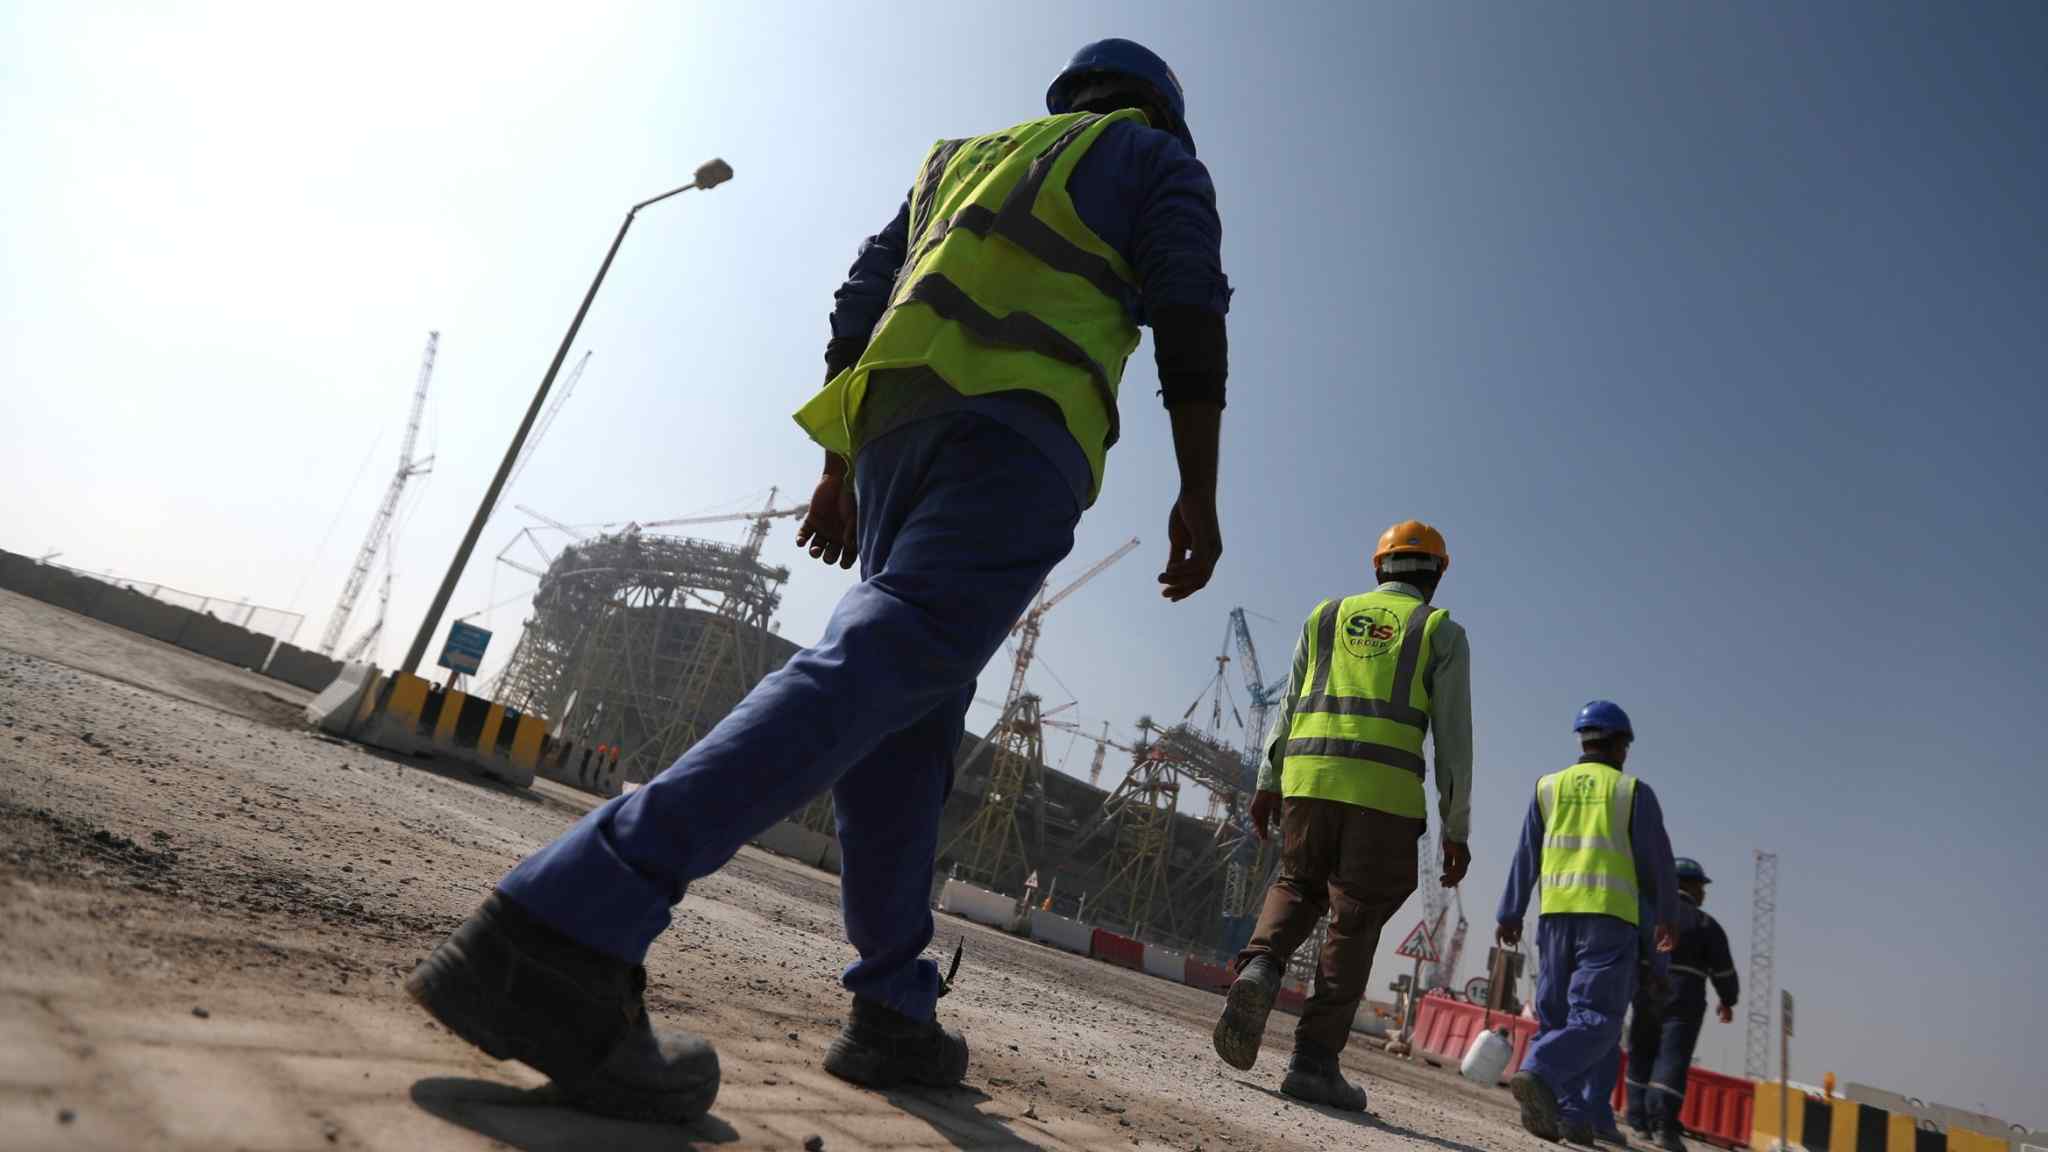 Qatari World Cup chief says 400 workers killed during construction